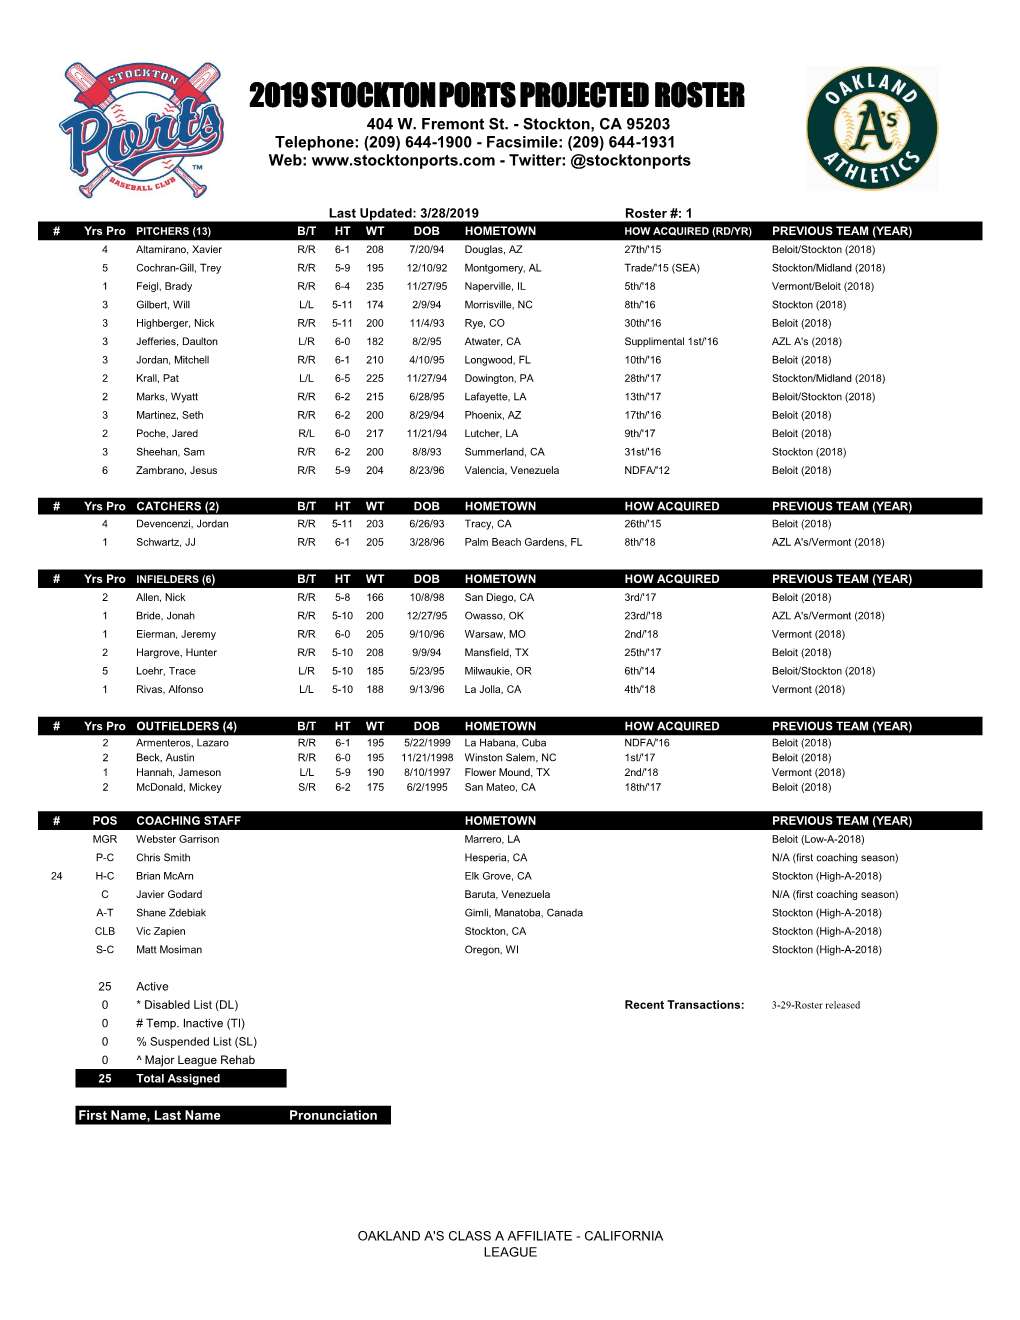 2019 Stockton Ports Projected Roster 404 W